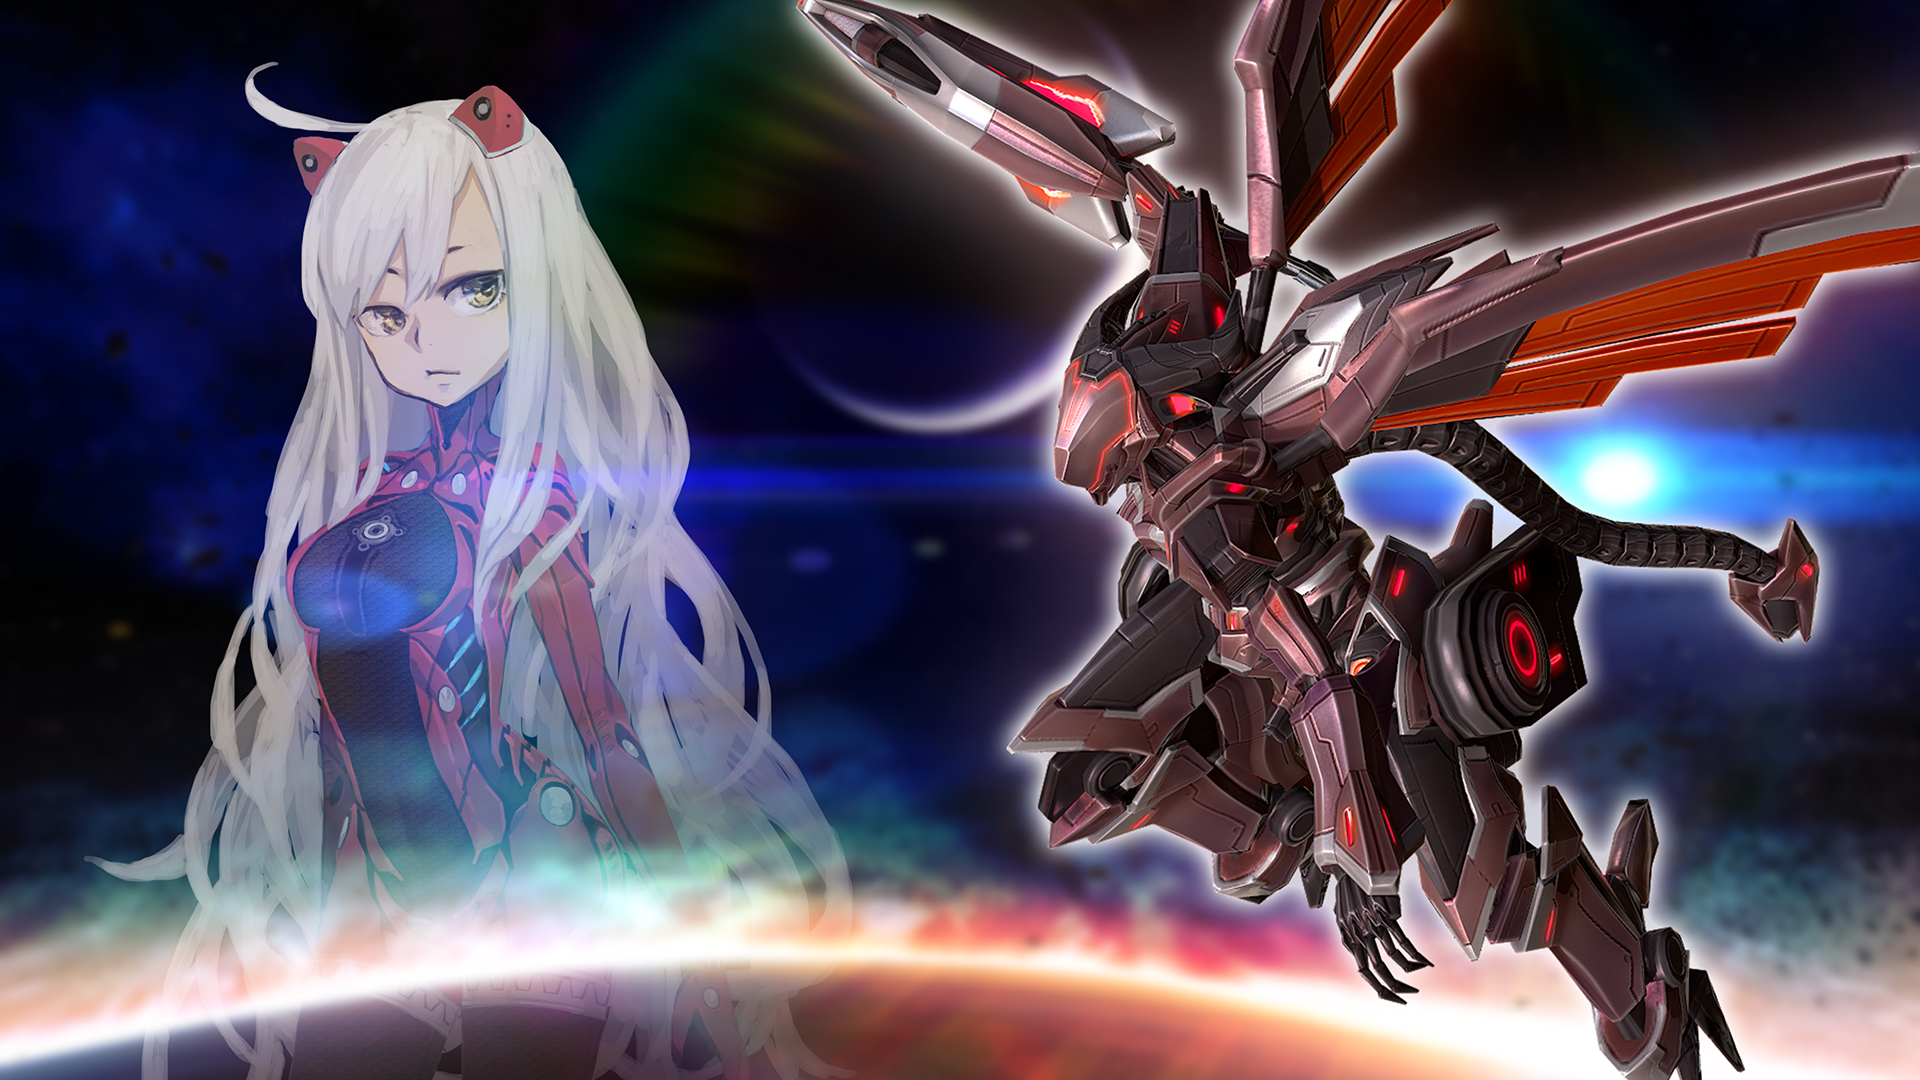 Nice Images Collection: Astebreed Desktop Wallpapers